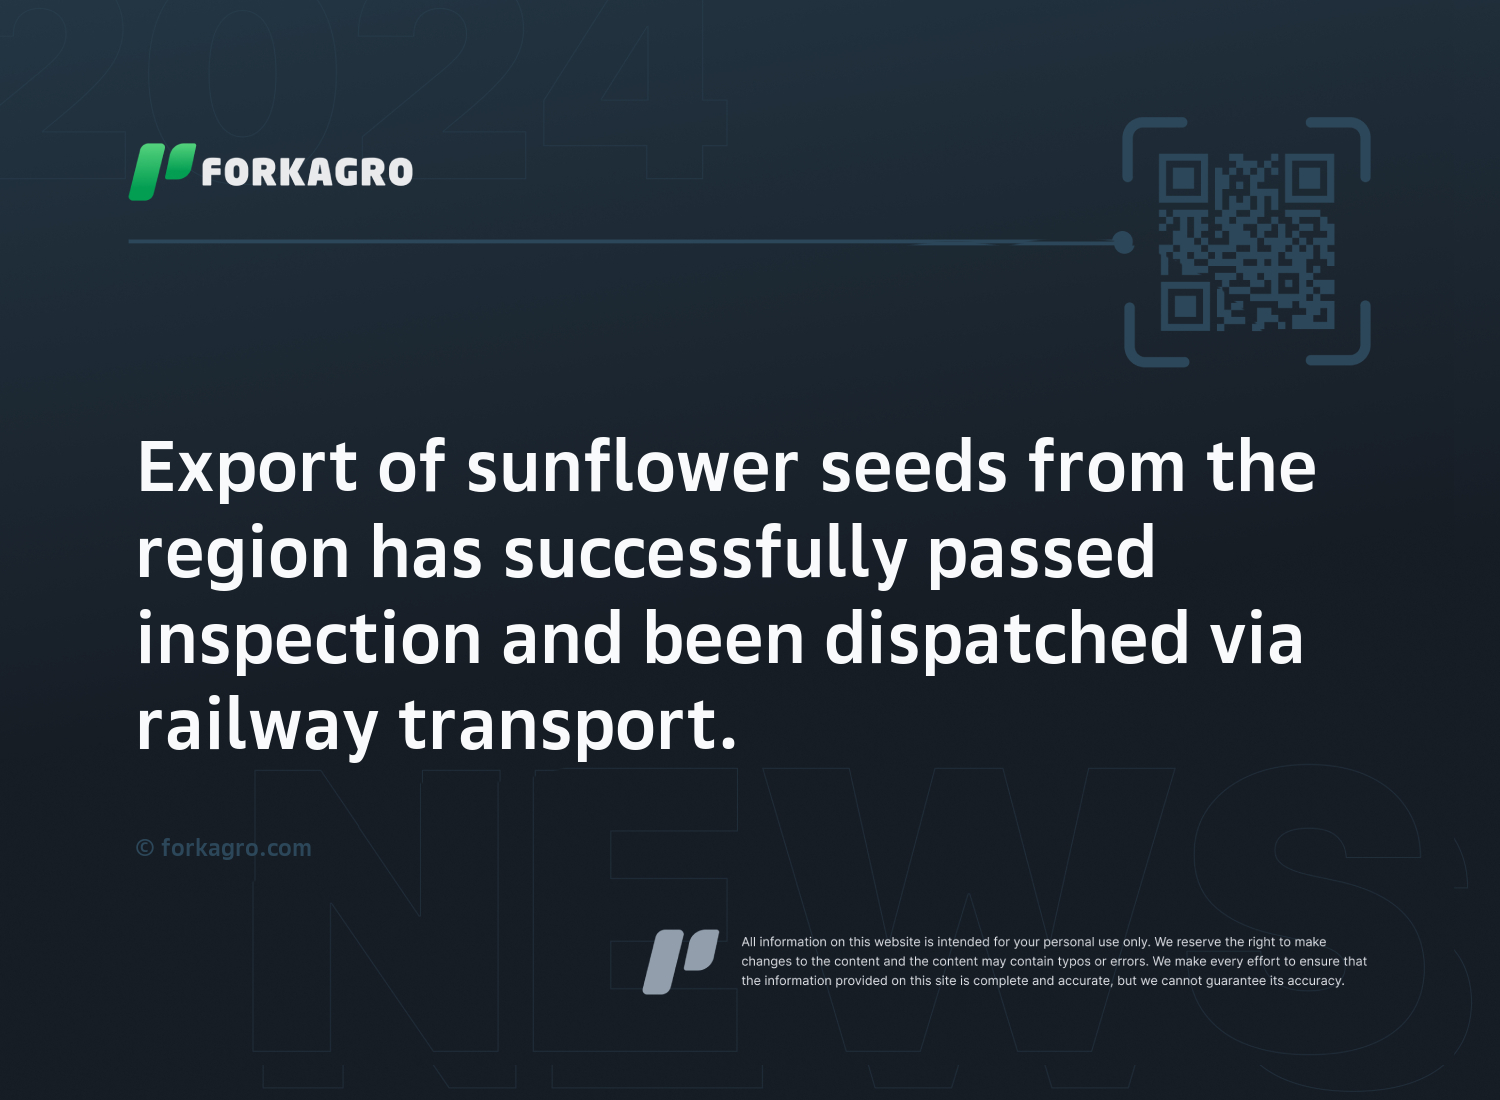 Export of sunflower seeds from the region has successfully passed inspection and been dispatched via railway transport.